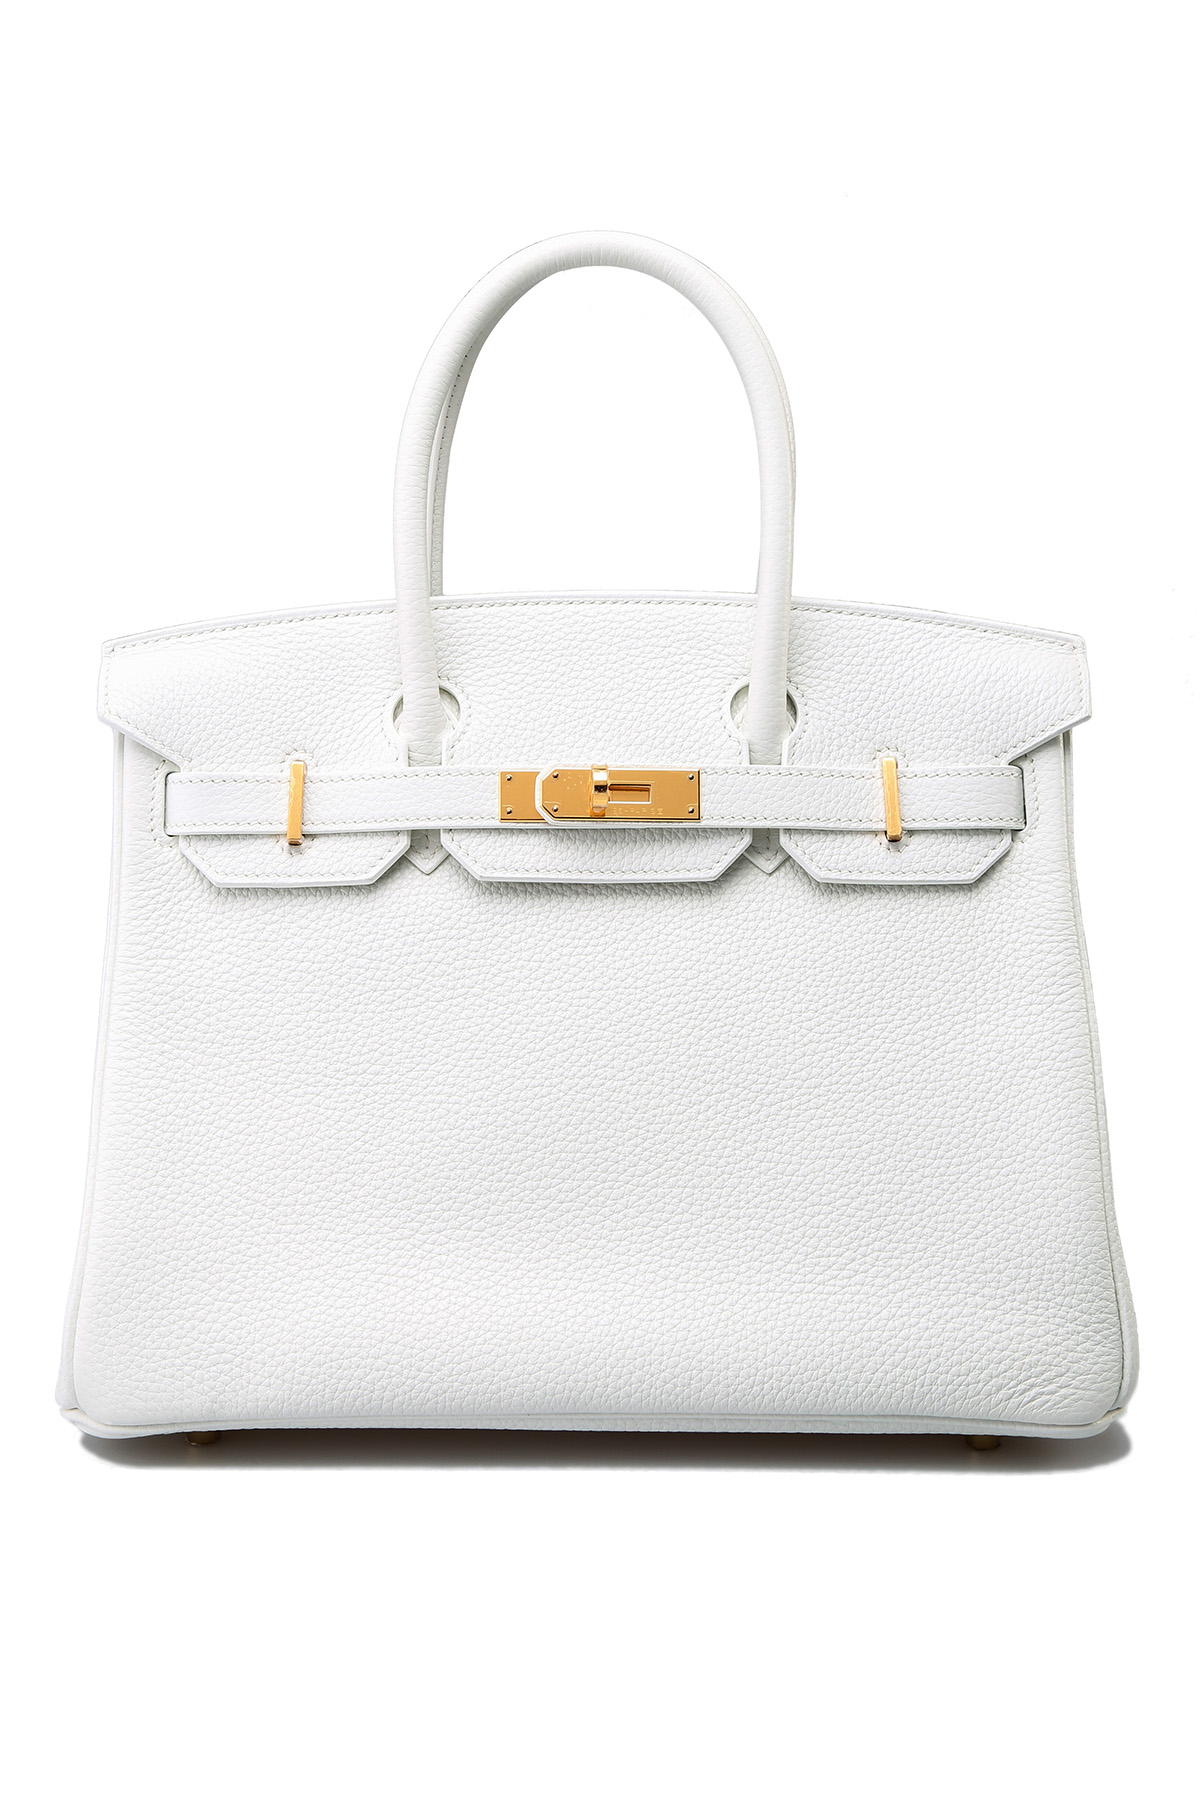 HERMÈS, BETON HORSESHOE STAMP SPECIAL ORDER BIRKIN 30 IN TAURILLON  CLEMENCE LEATHER WITH PINK STITCHING AND PALLADIUM HARDWARE, 2020, Handbags and Accessories, 2020